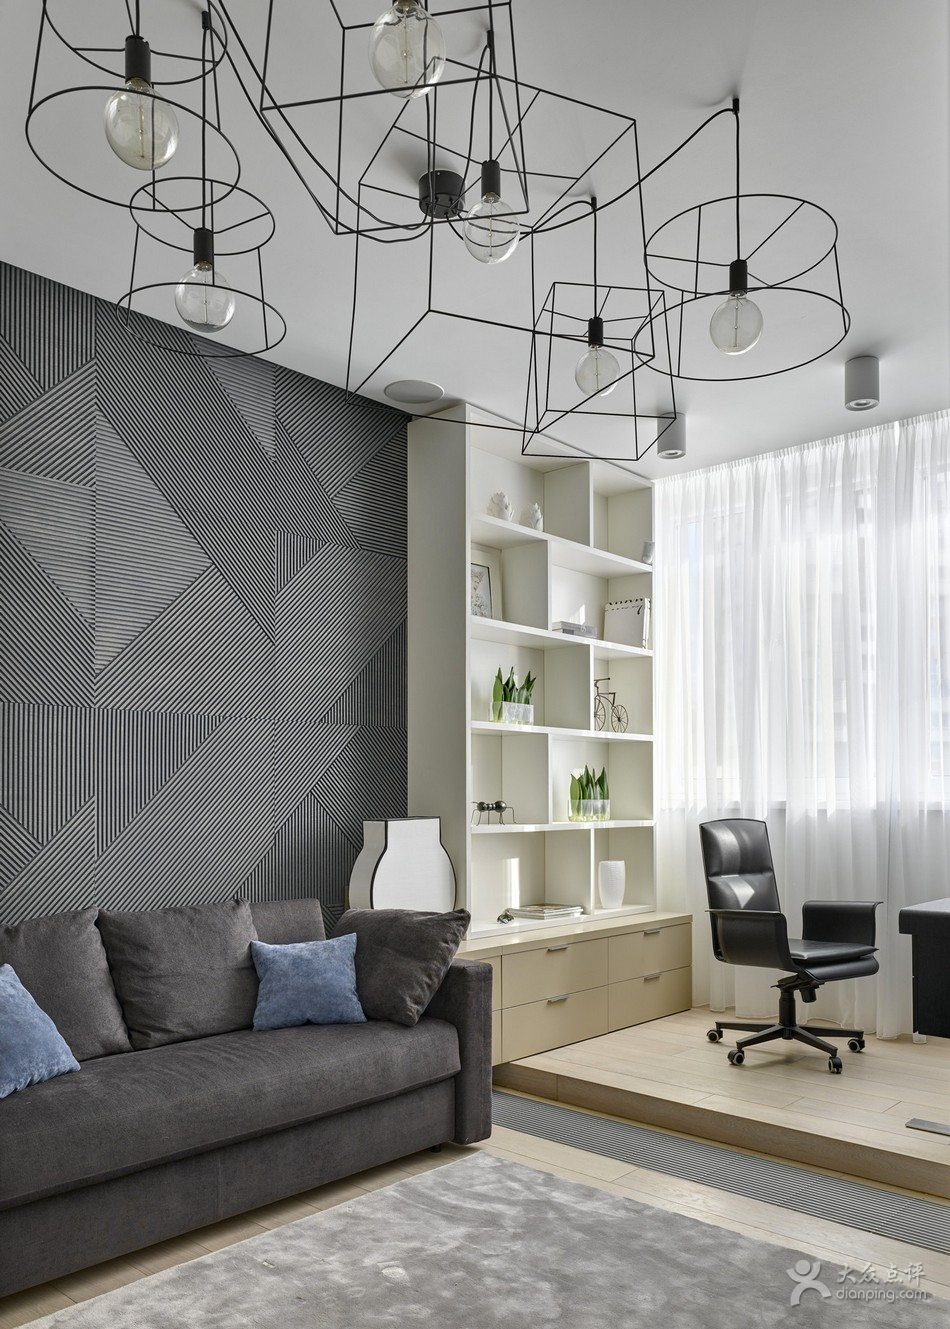 10 MODERN APARTMENT DESIGNS TO INSPIRE YOU